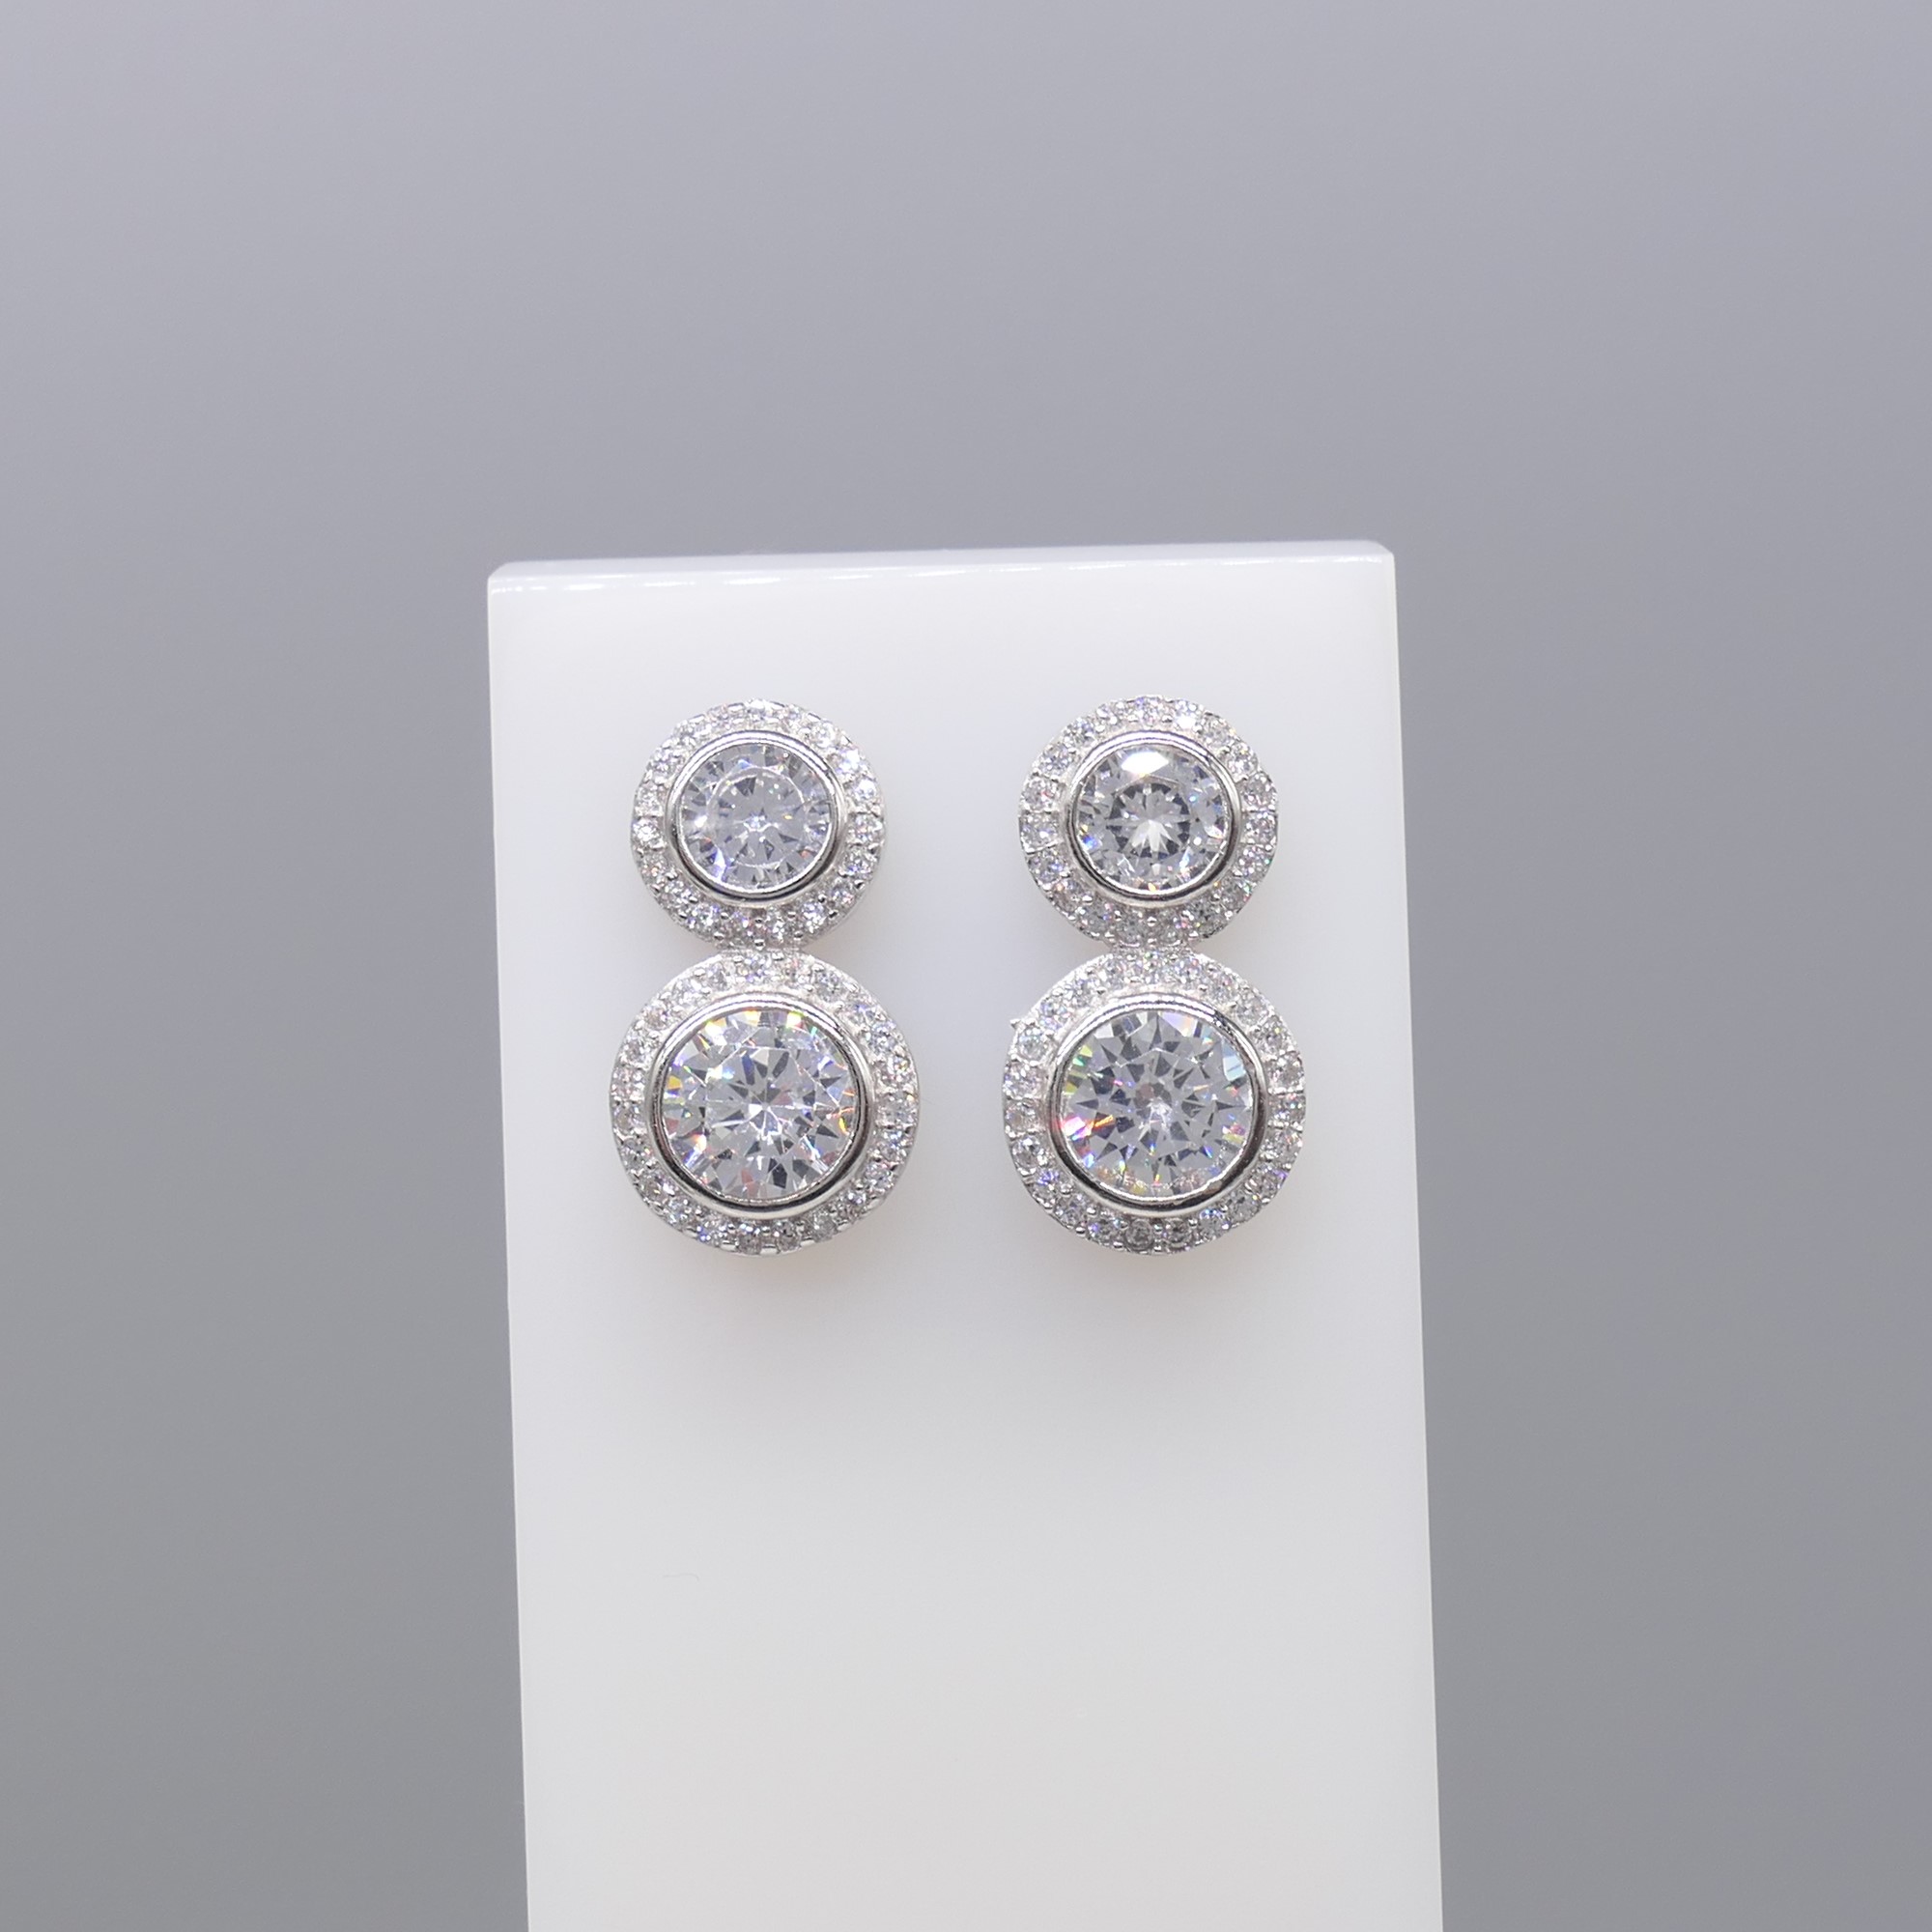 Gem-set double halo droplet earrings in silver - Image 5 of 6